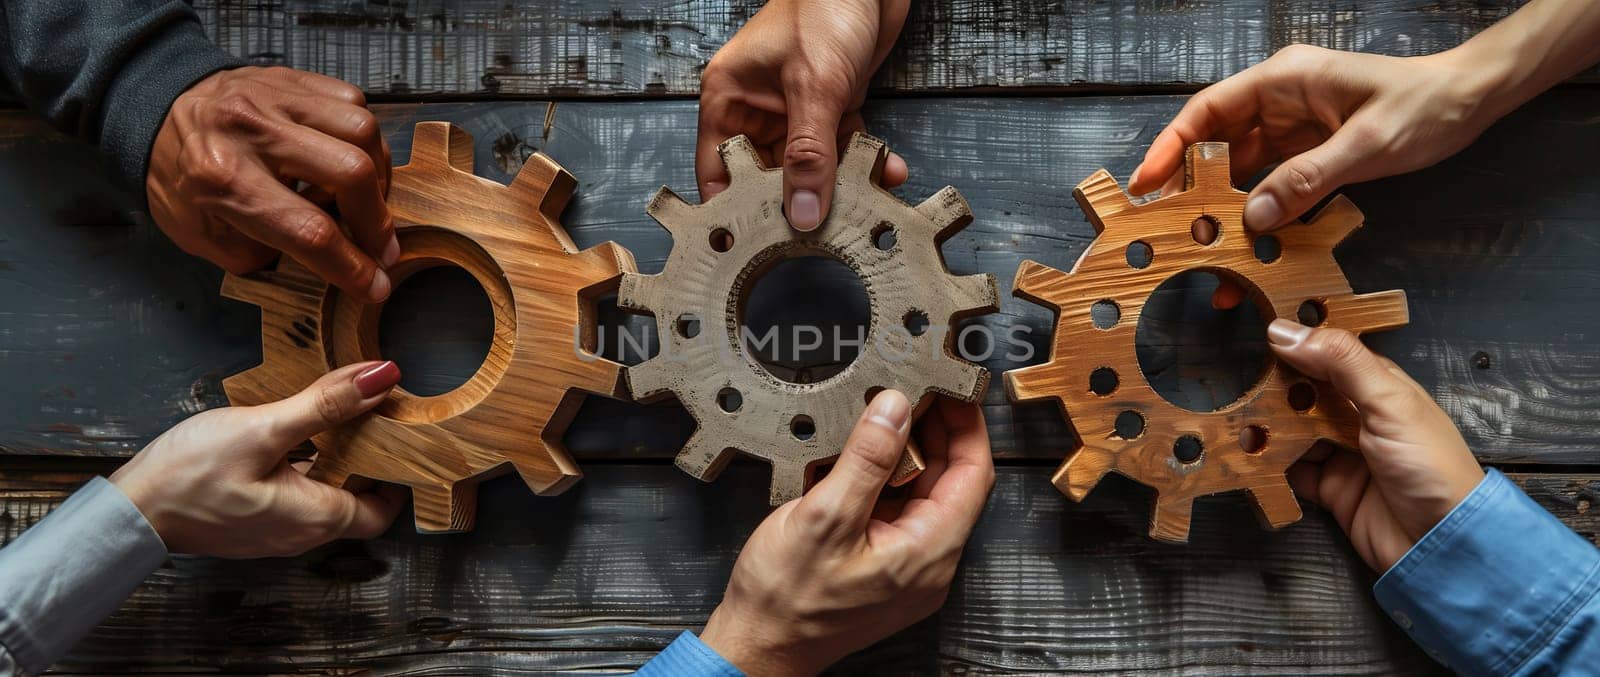 A group of people are holding wooden gears, reminiscent of bicycle parts or musical instruments. The gears are intricately designed, resembling art pieces at a metal and wood event